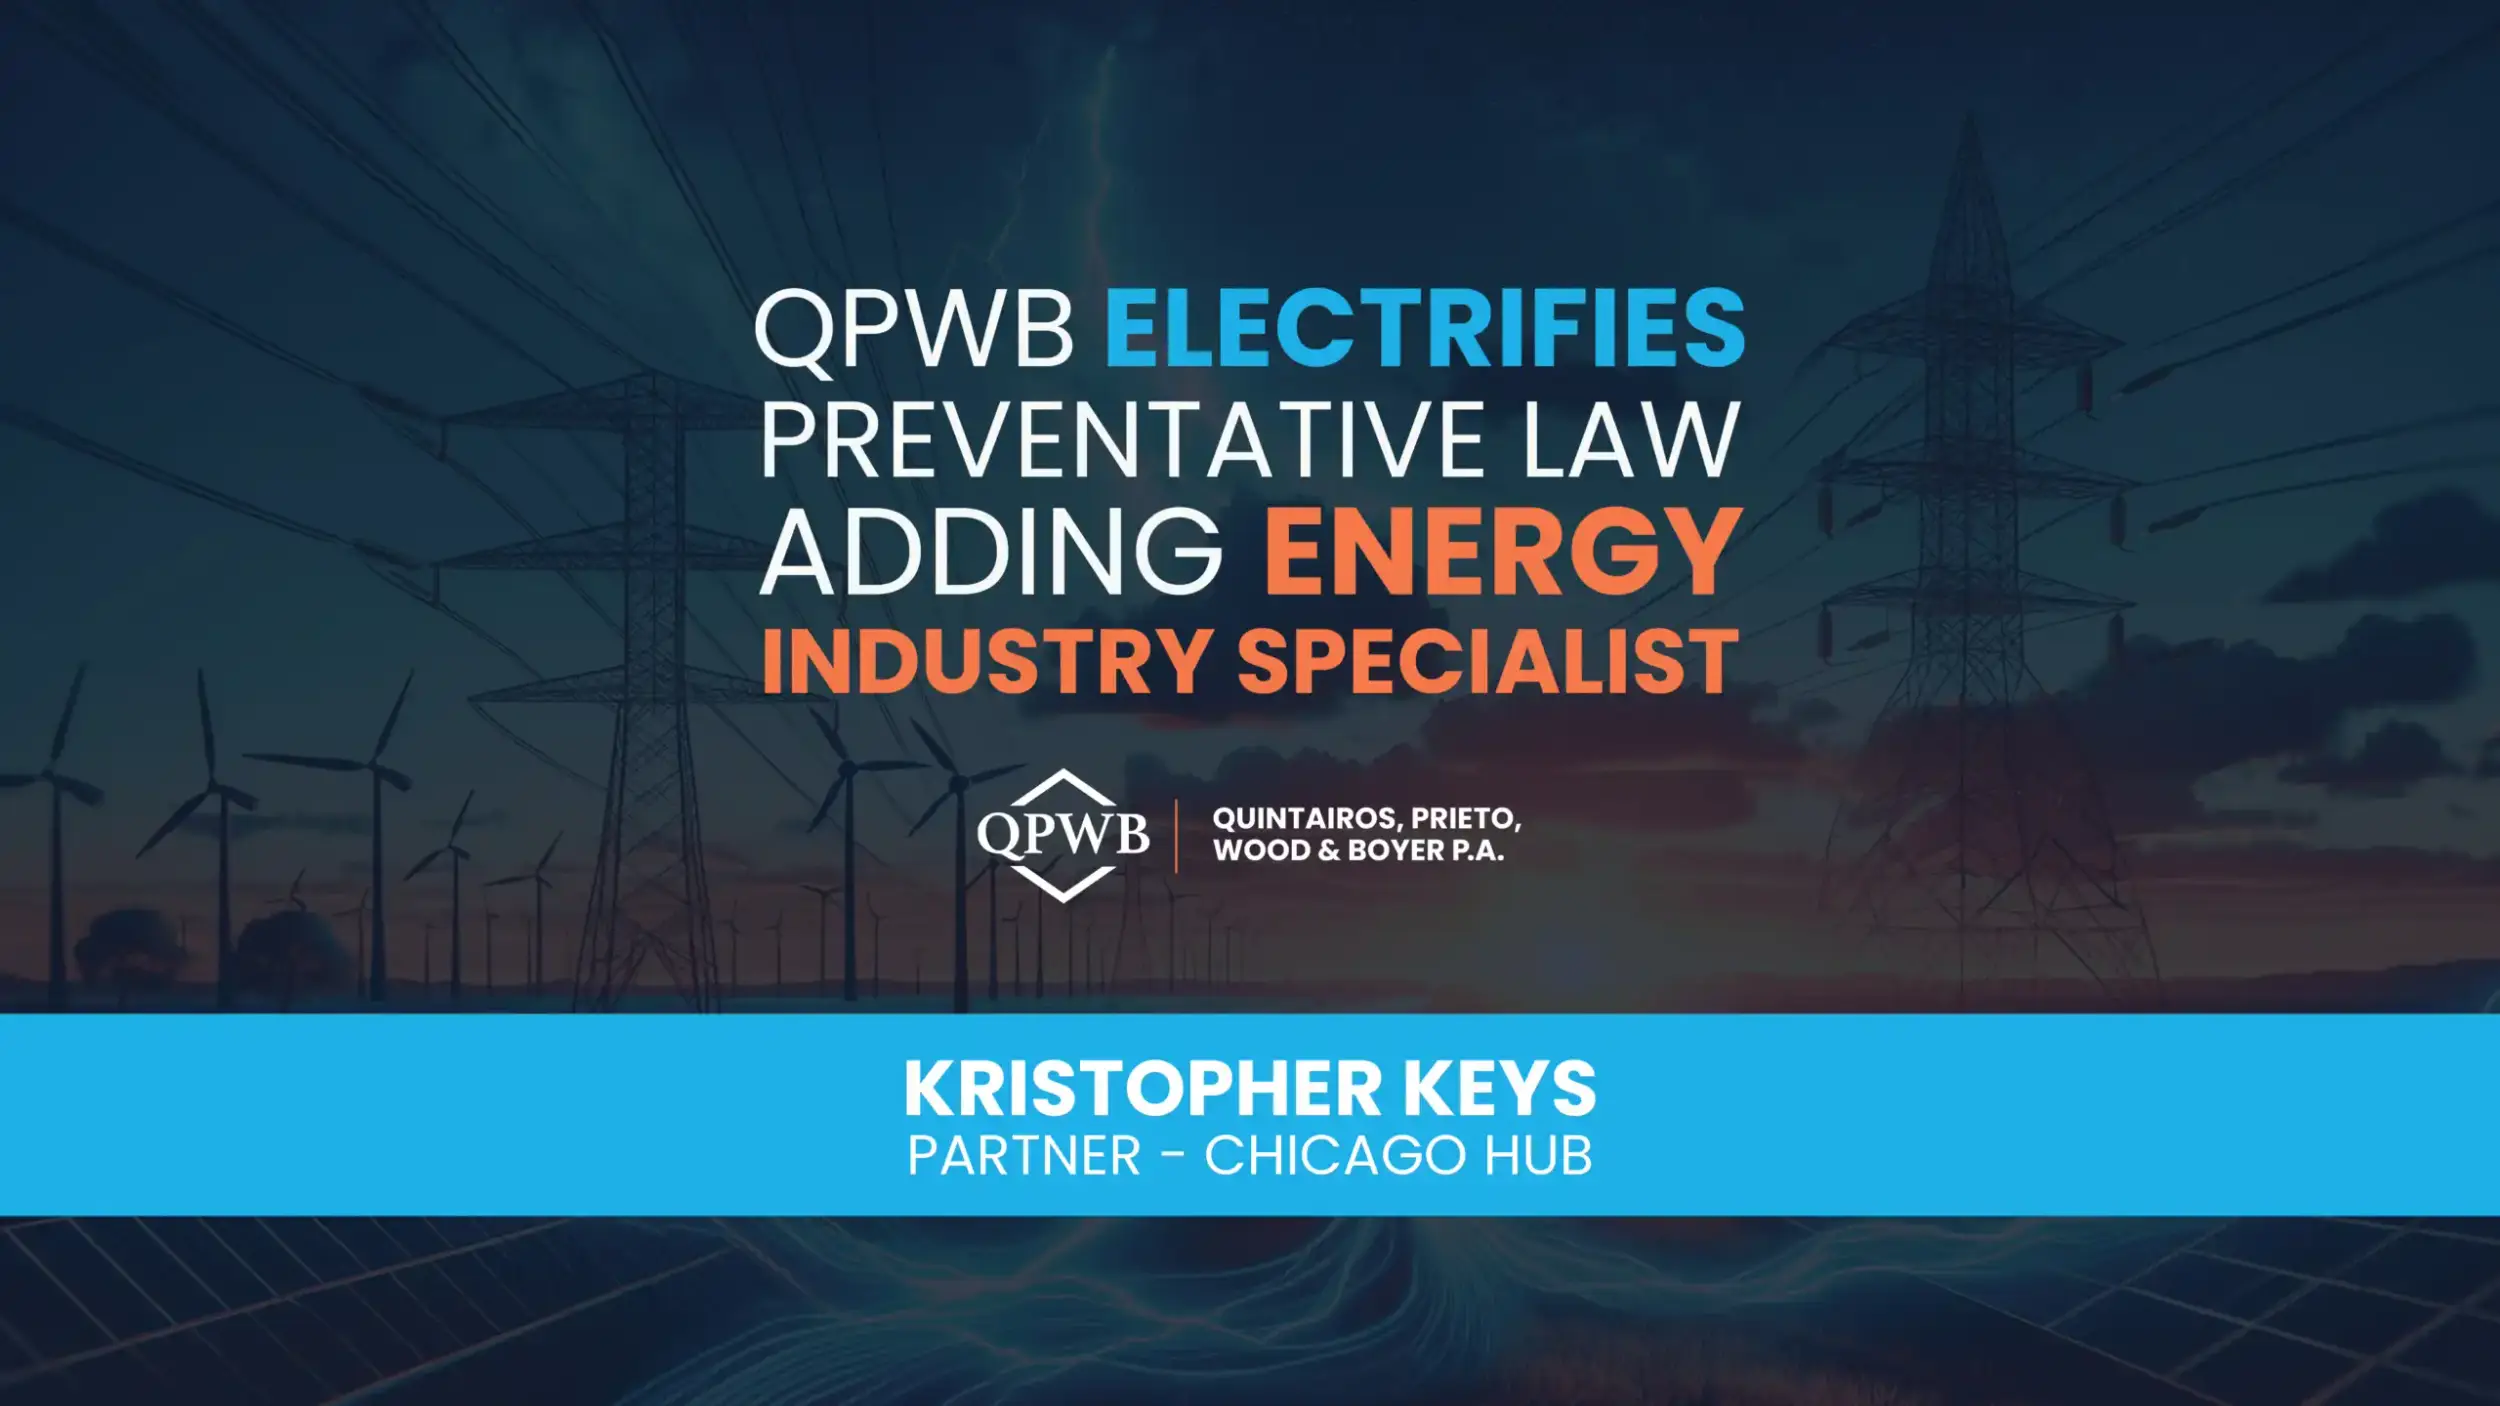 QPWB Electrifies Preventative Law Adding Energy Industry Specialist